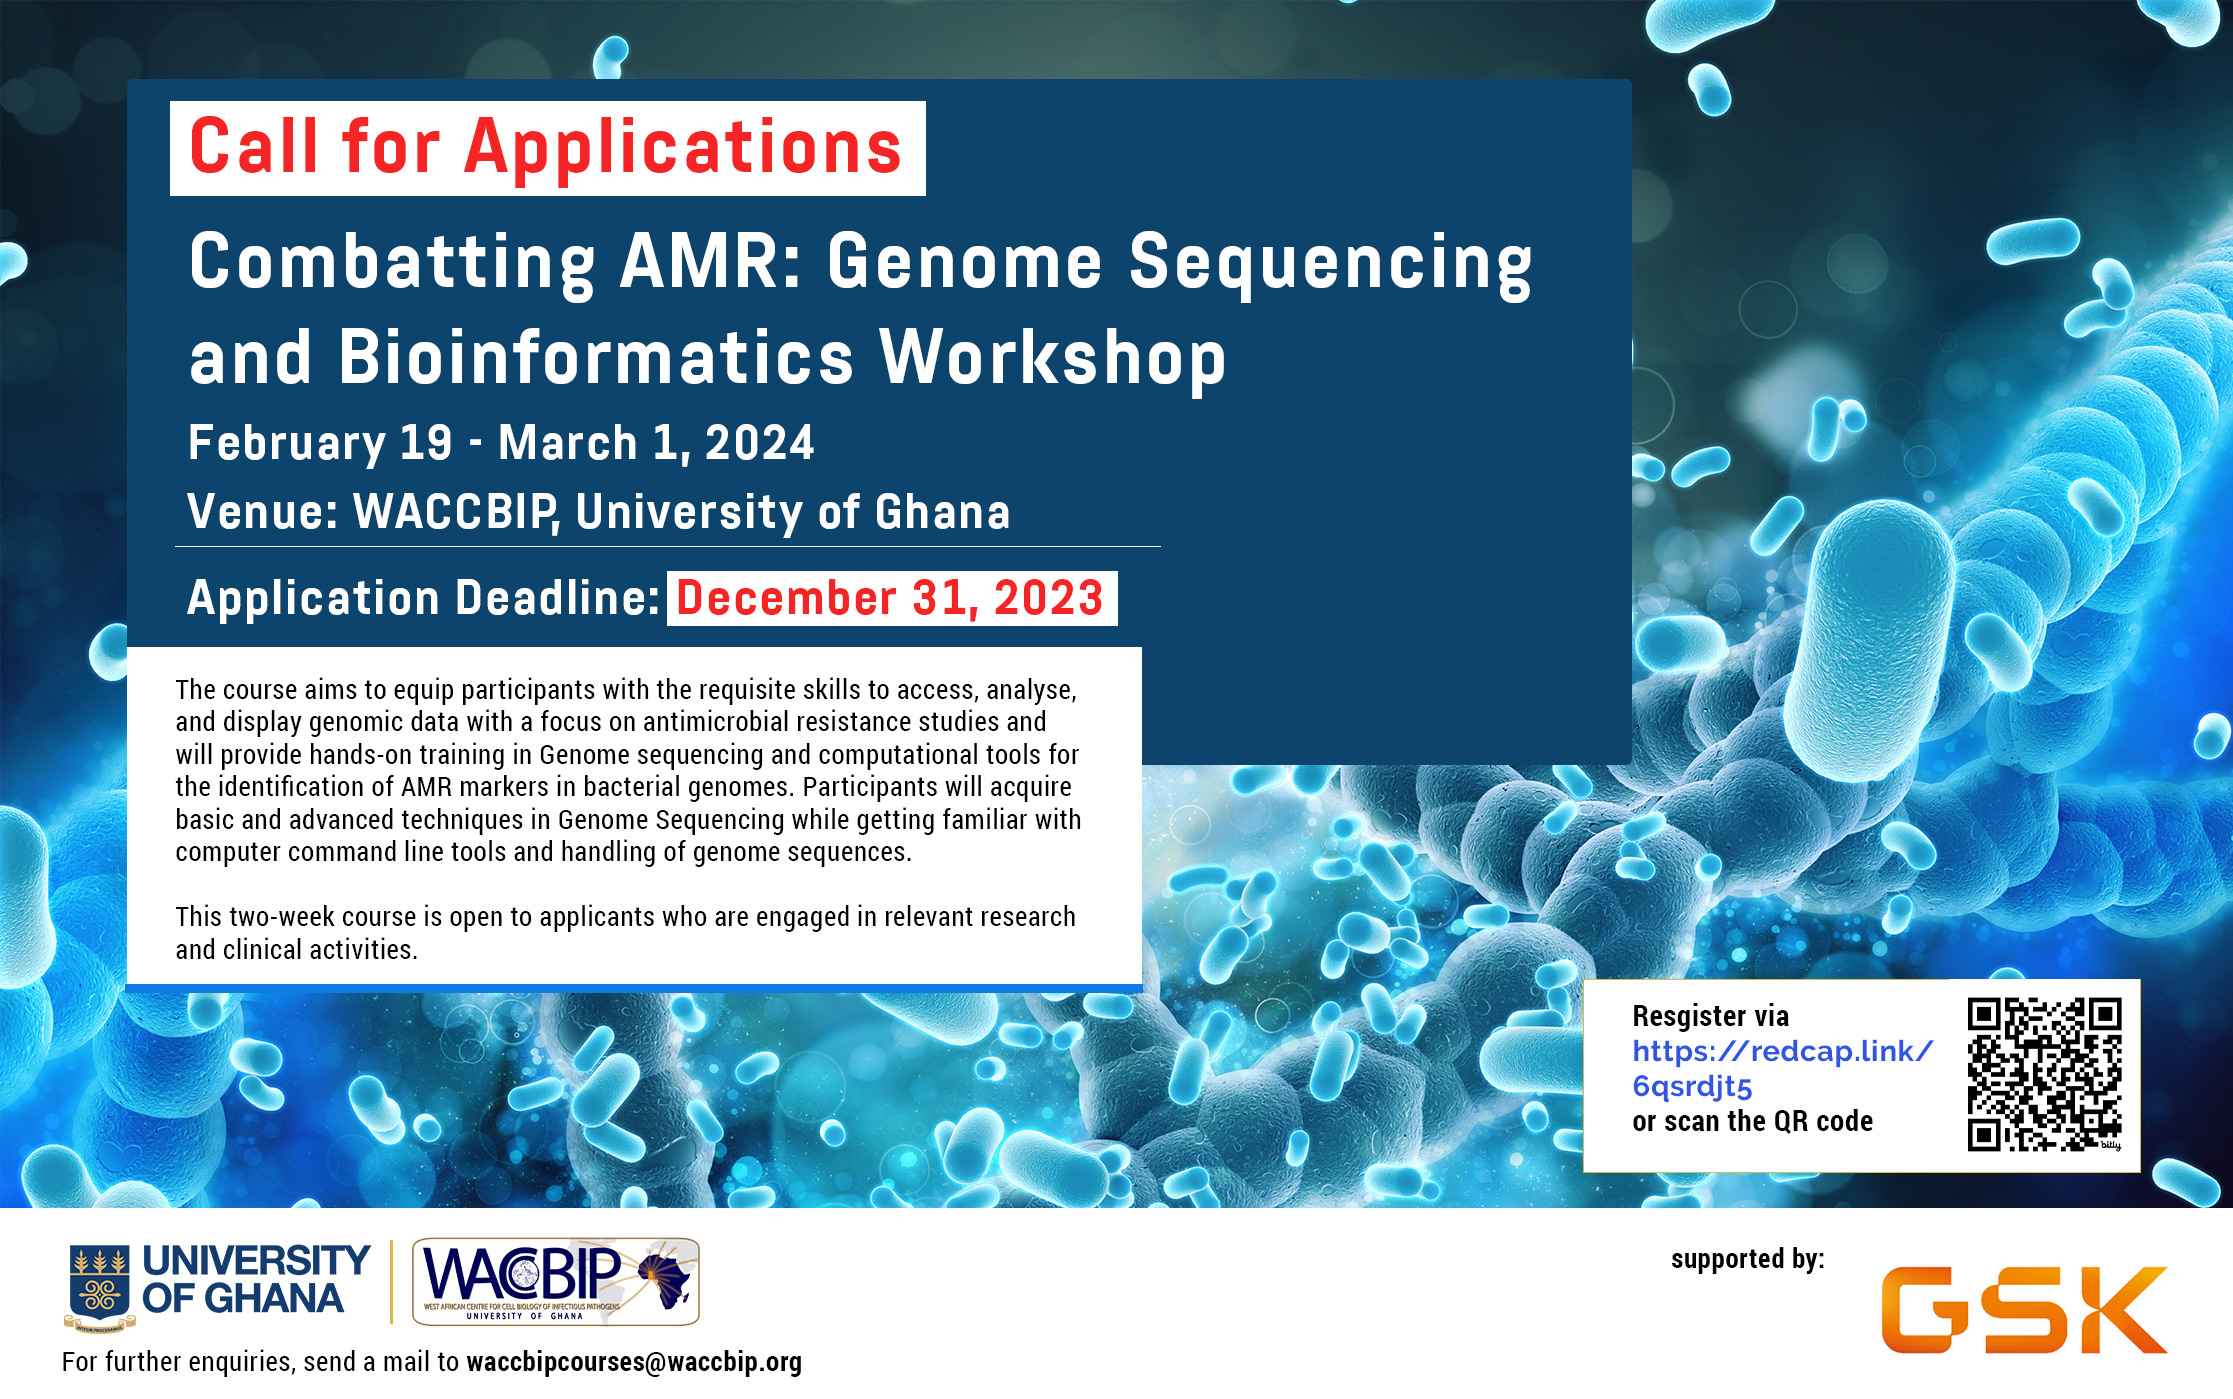 Call for Applications: Combatting Antimicrobial Resistance (AMR): Genome sequencing and Bioinformatics Workshop